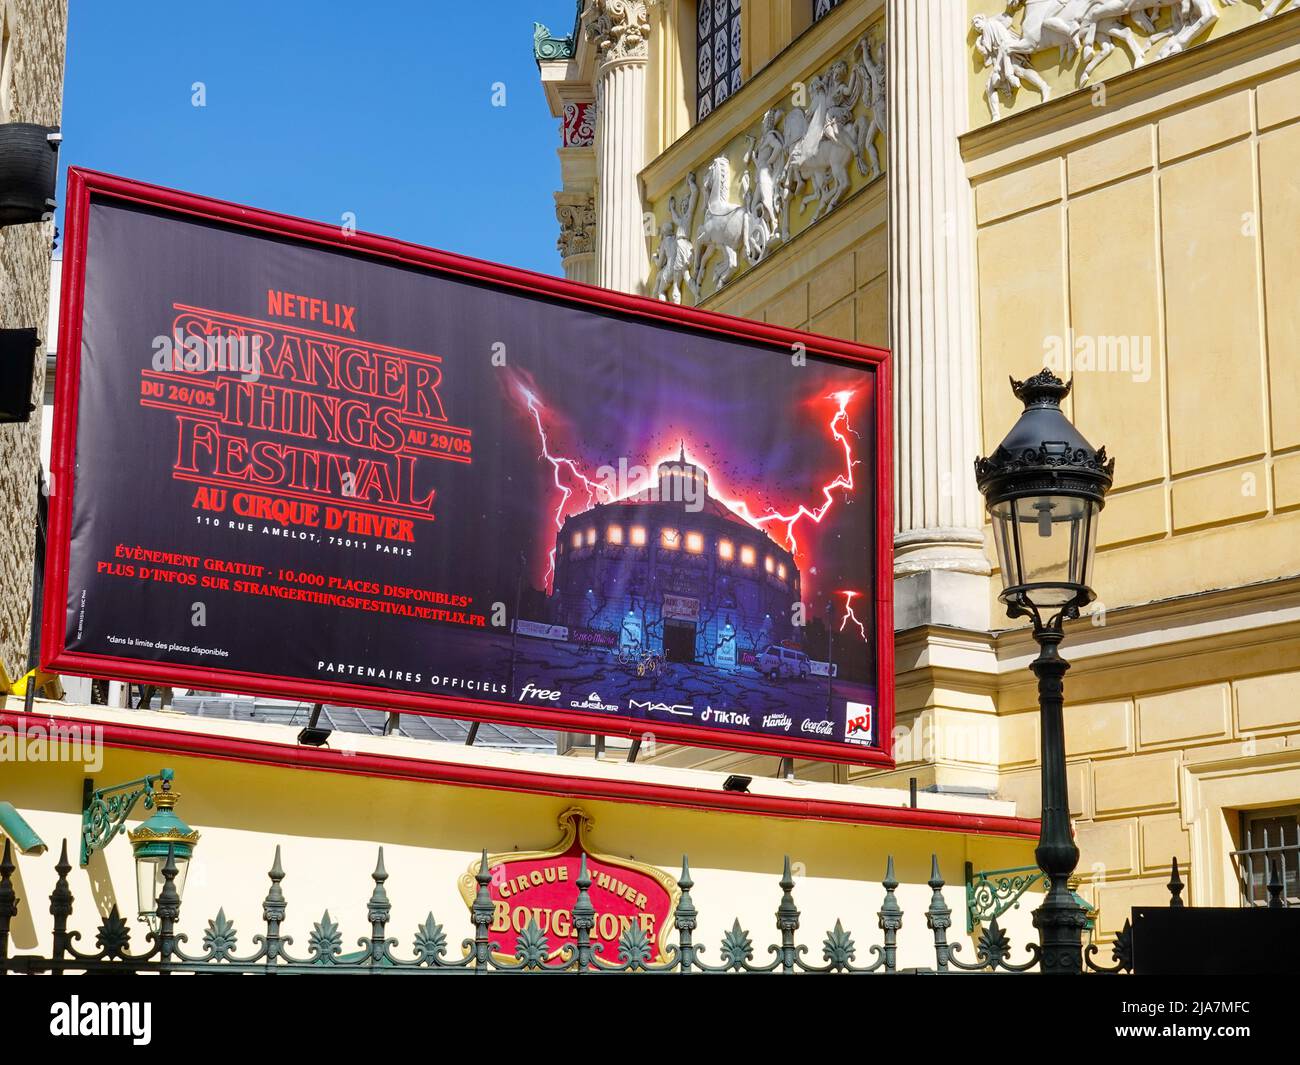 Paris, FR. 28th May, 2022. Sign for the NETFLIX: Stranger Things Festival held at Cirque d’Hiver Bouglione, Rue Amelot, 11th Arrondissement. While launching the 4th season of Stranger Things, Netflix invited the public to explore the upside down world at Cirque d’Hiver Bouglione with the Stranger Things Festival, May 26 to 29, 2022. Stock Photo